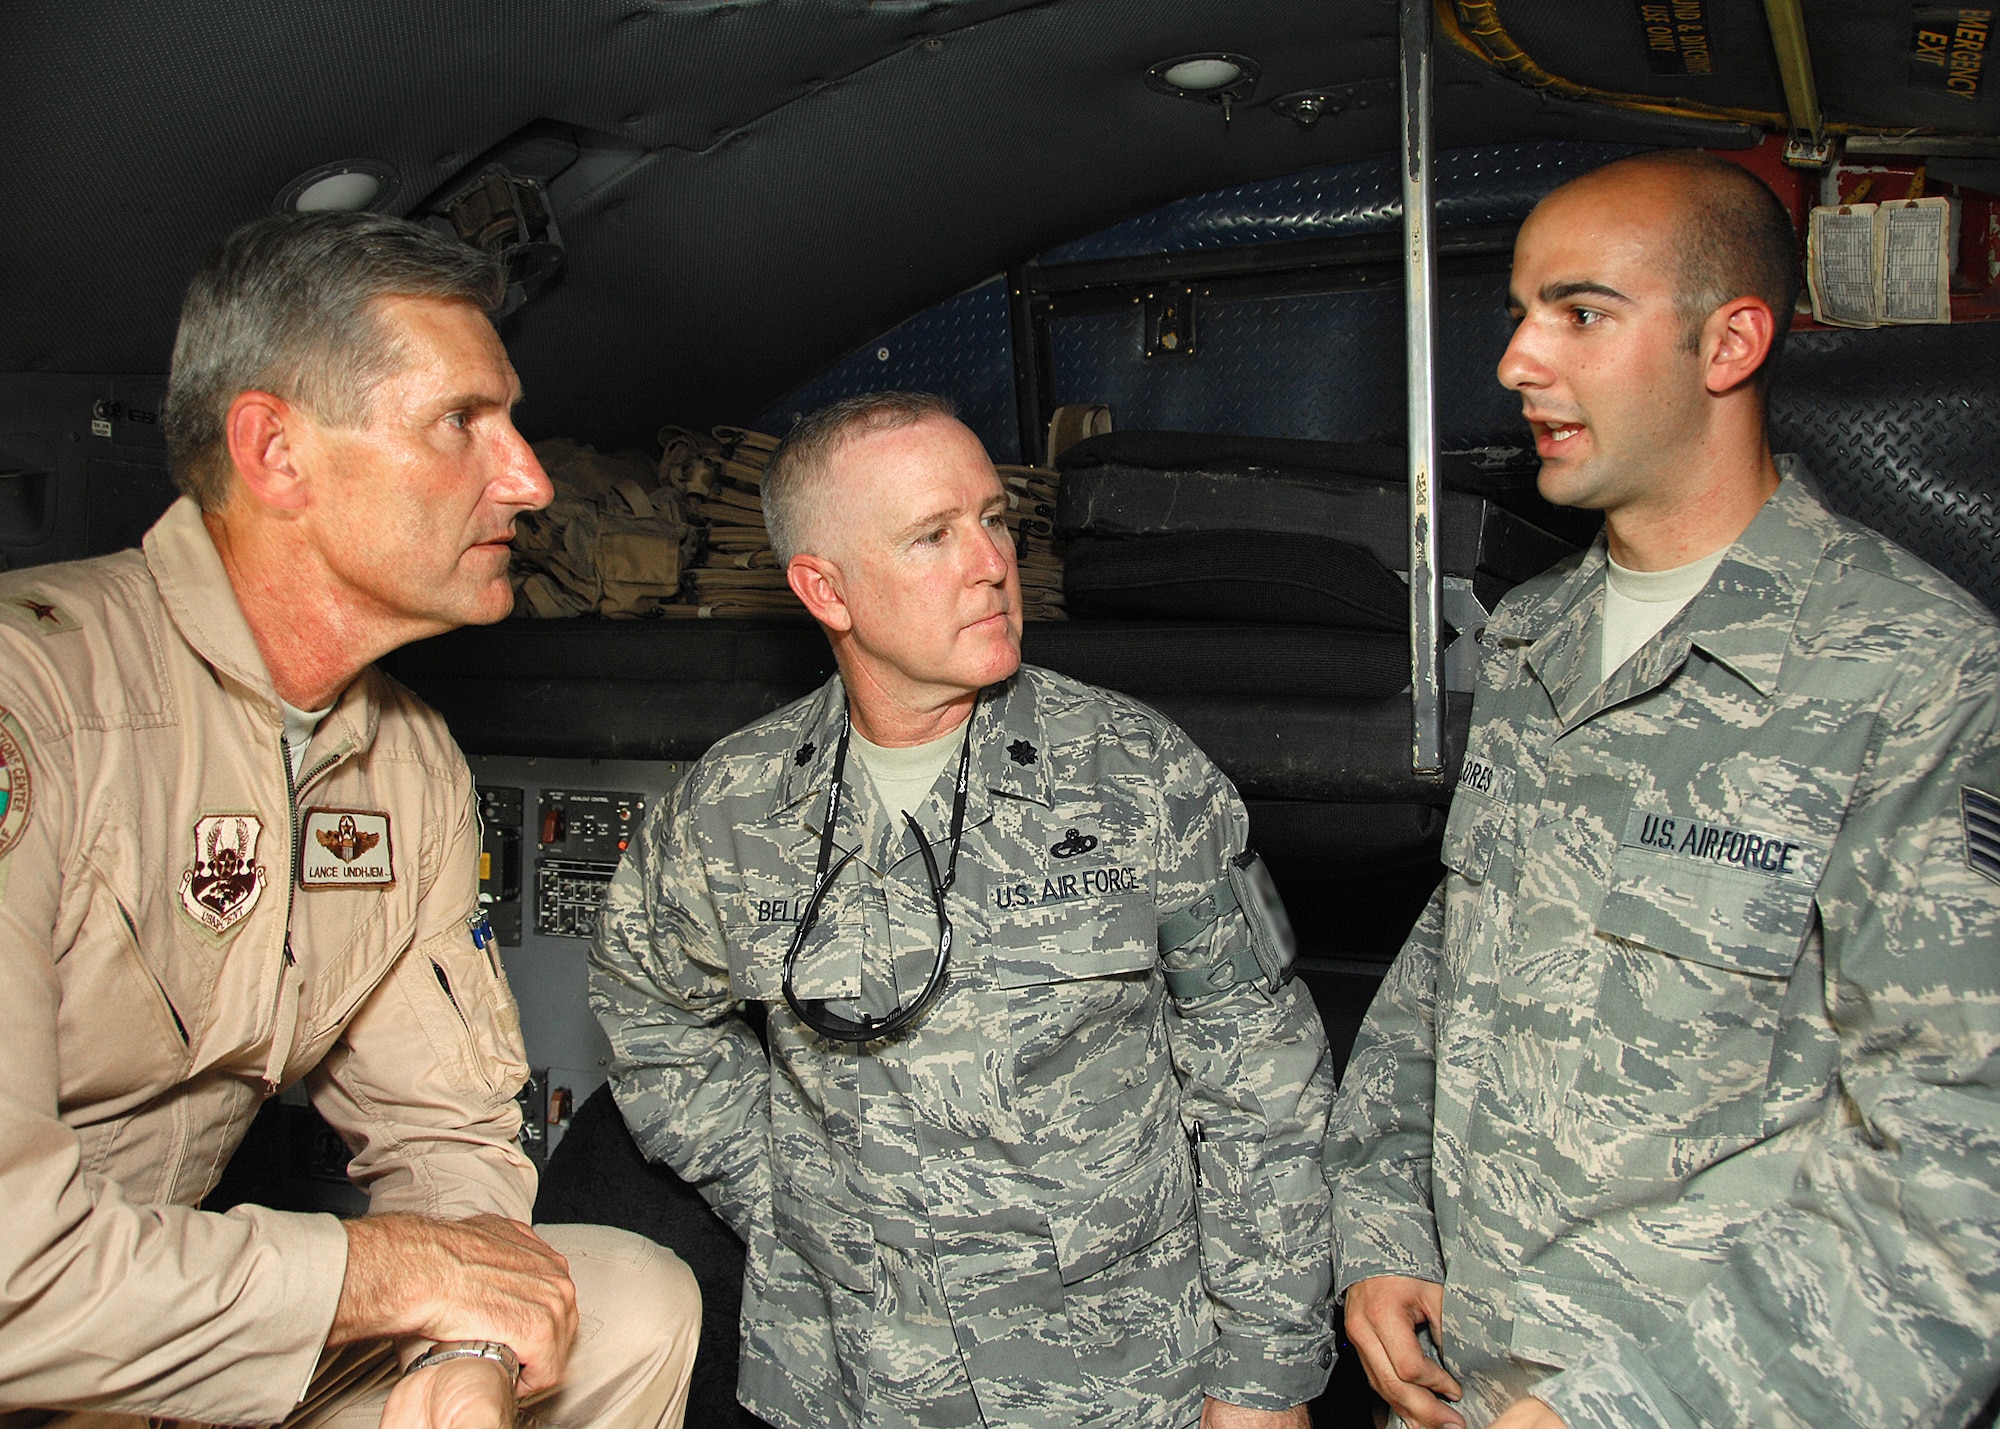 SOUTHWEST ASIA -- Brig. Gen. Lance Undjem, Combined Air and Space Operations Center director, talks with Lt. Col. Alfred Bello and Staff Sgt. Ryan Flores, both with the 386th Expeditionary Aircraft Maintenance Squadron, about how the CAOC can help improve maintenance processes on the C-130 on Aug. 29 at an air base in Southwest Asia. General Undjem is the new CAOC director, and is touring U.S. Central Command observing how the CAOC contributes to day-to-day operations in the theater. Sergeant Flores is deployed from Dyess Air Force Base, Texas. (U.S. Air Force photo/Tech. Sgt. Raheem Moore)